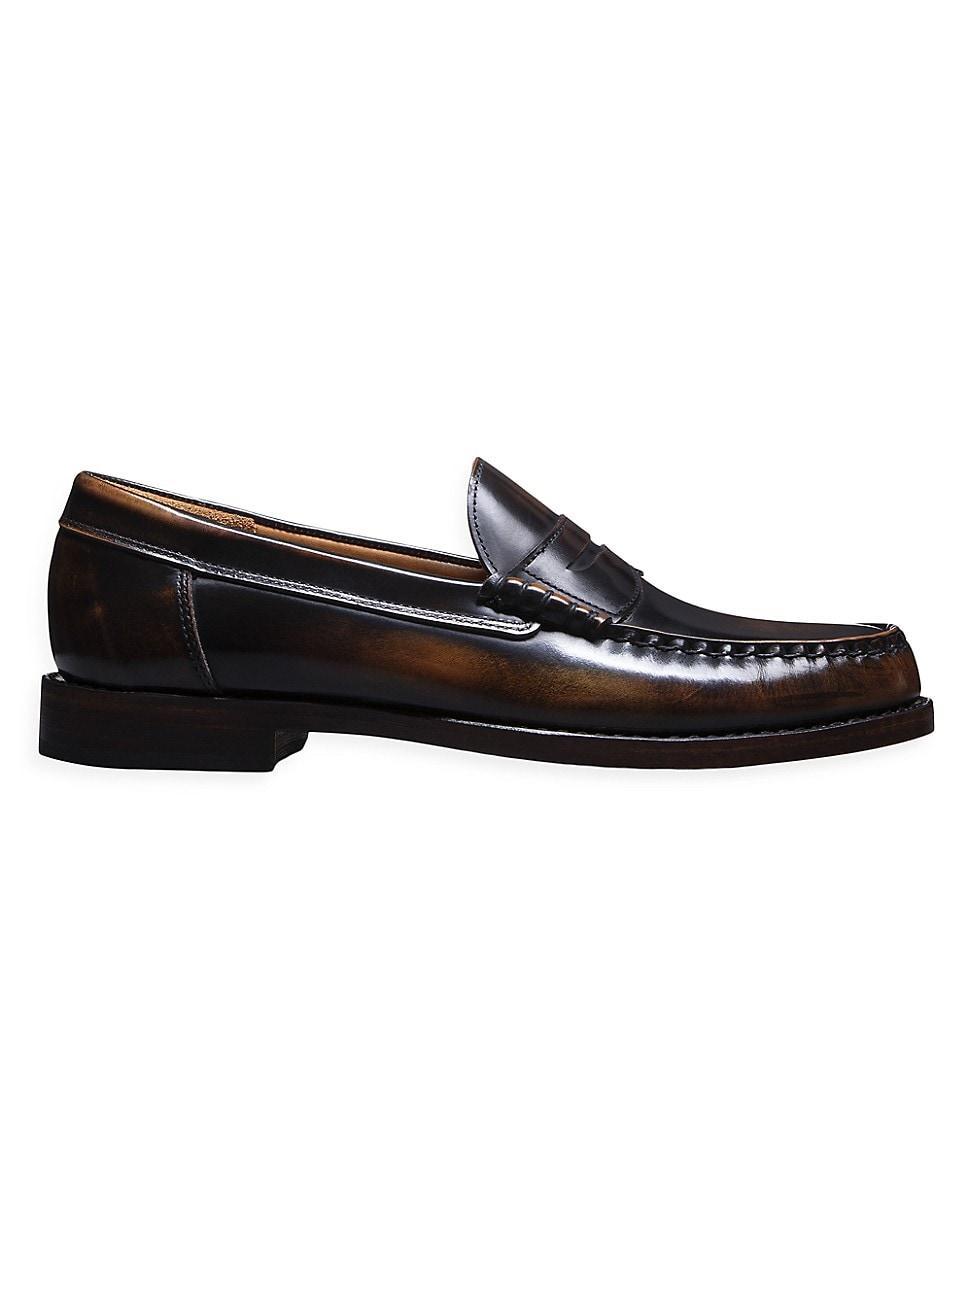 Allen Edmonds Newman Penny Loafer Product Image